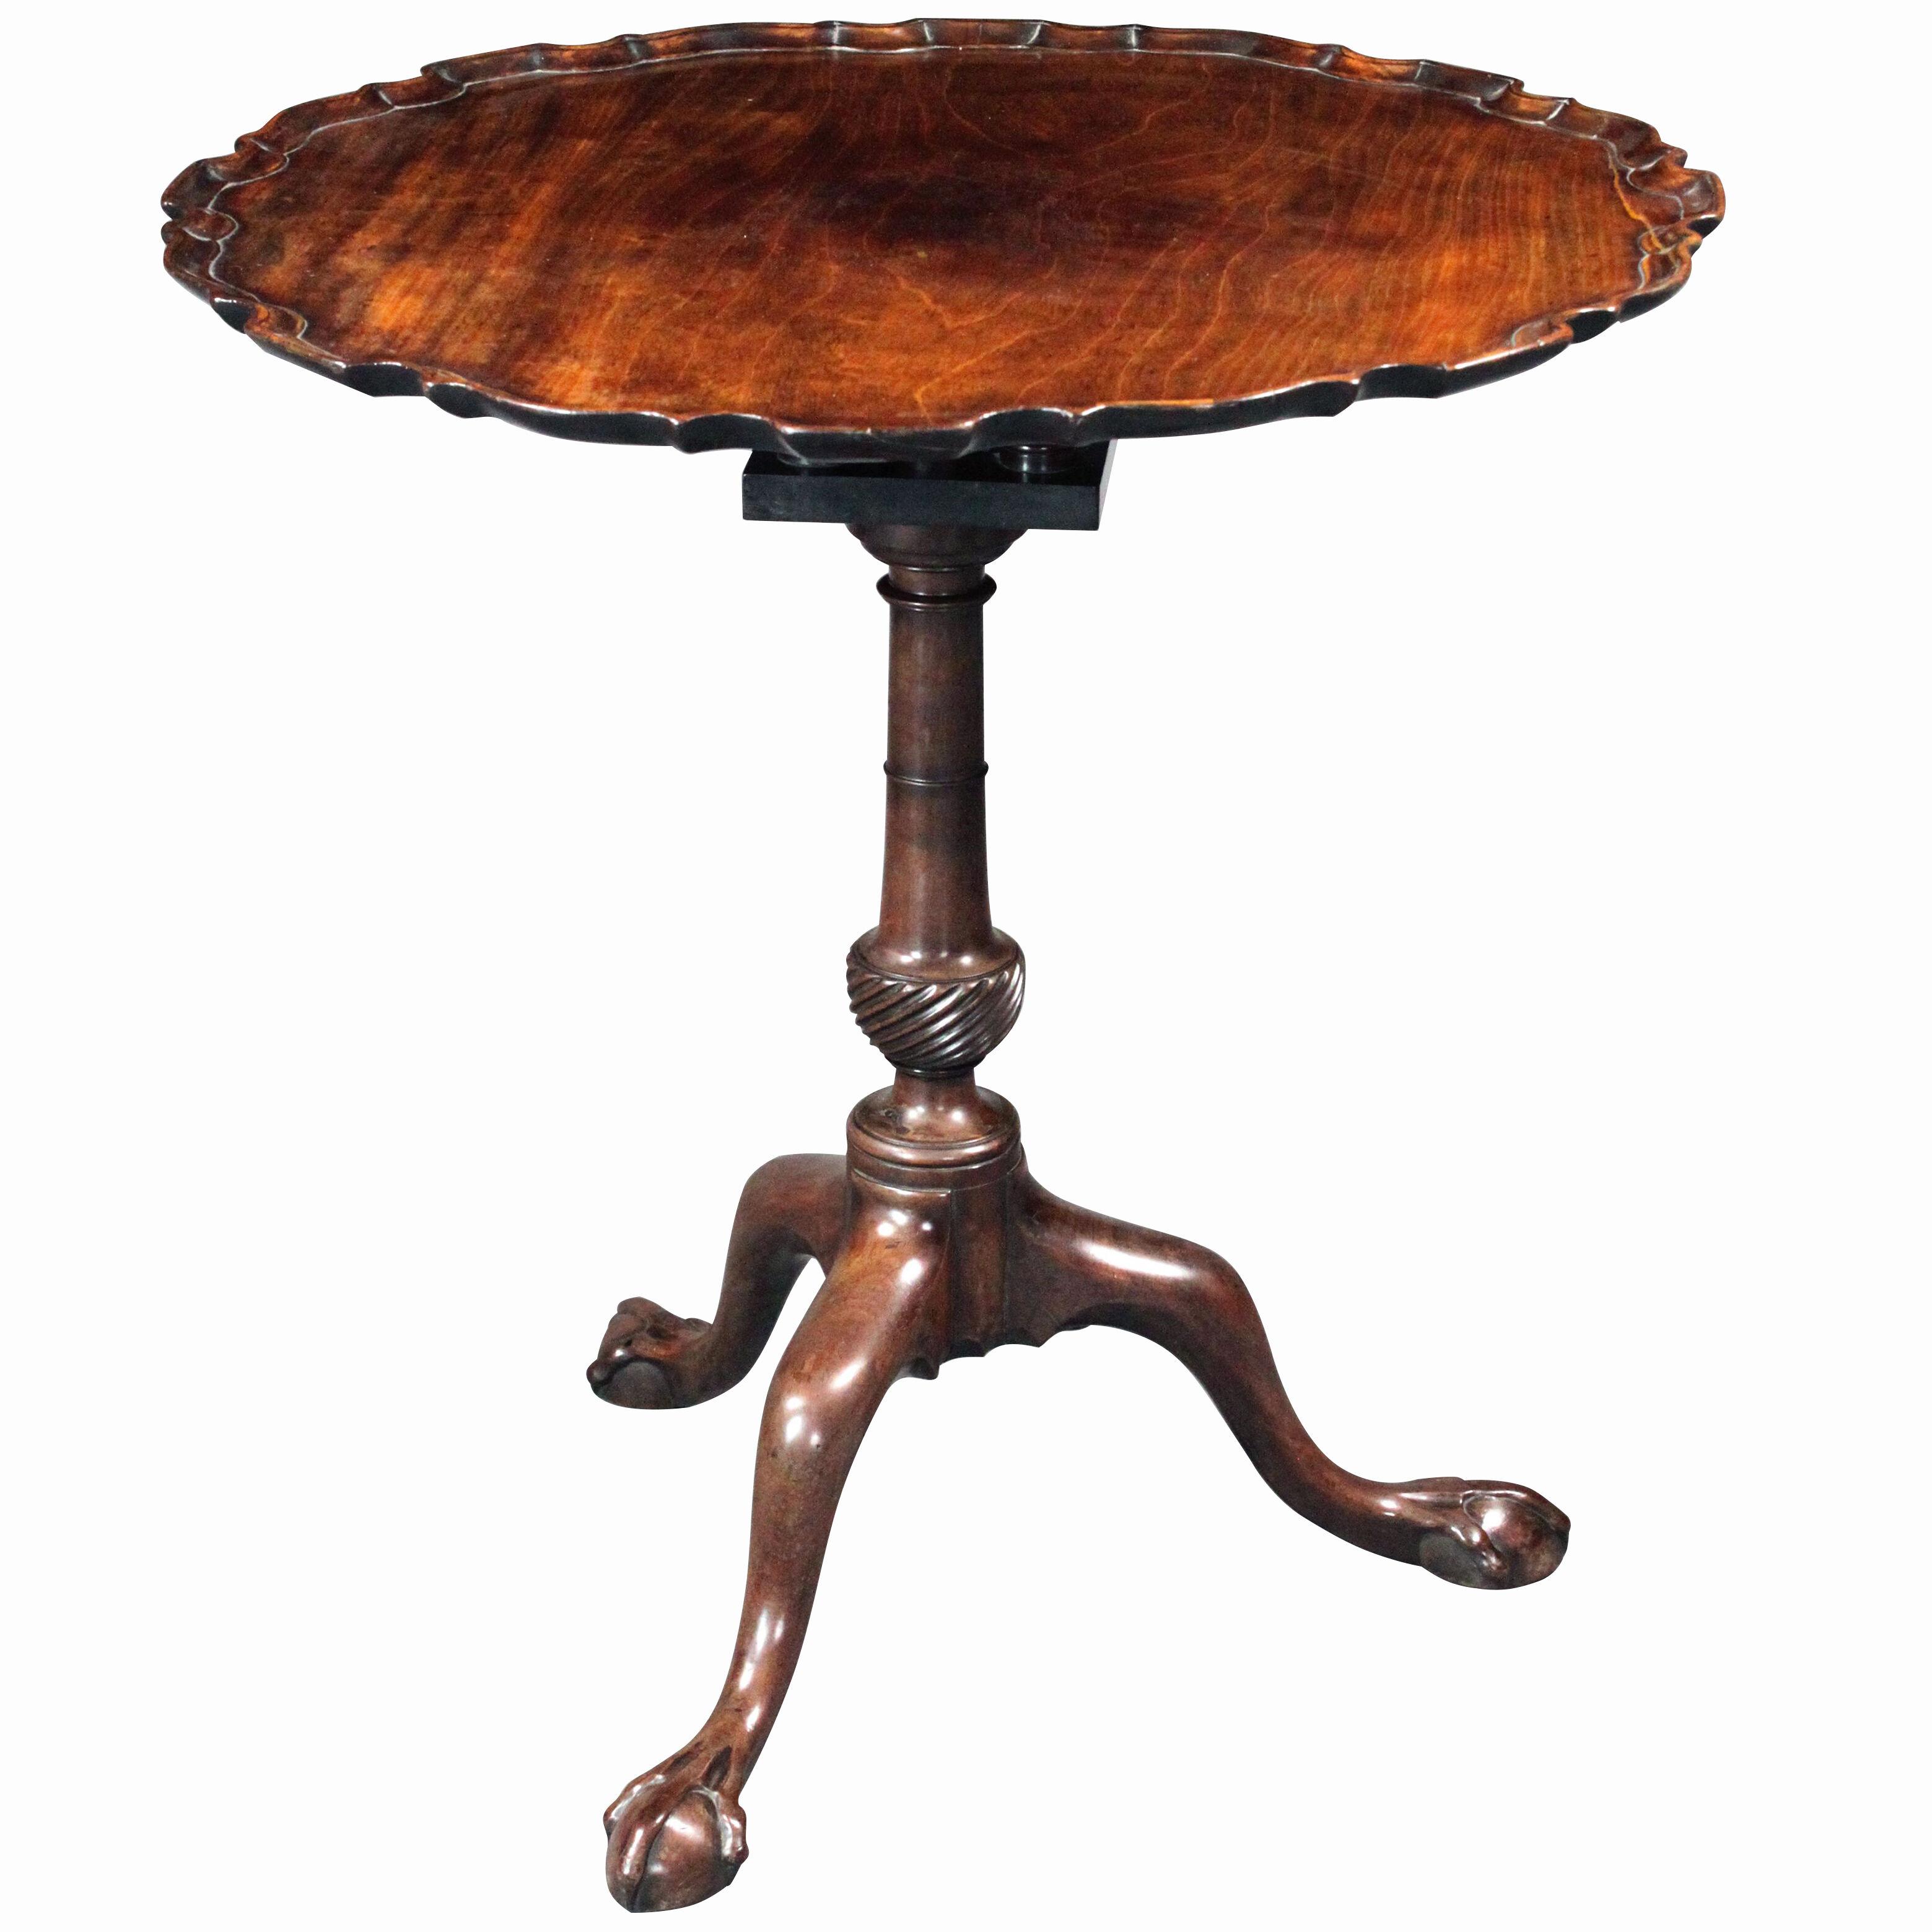 George III Chippendale Period Tripod Table with Pie Crust Top